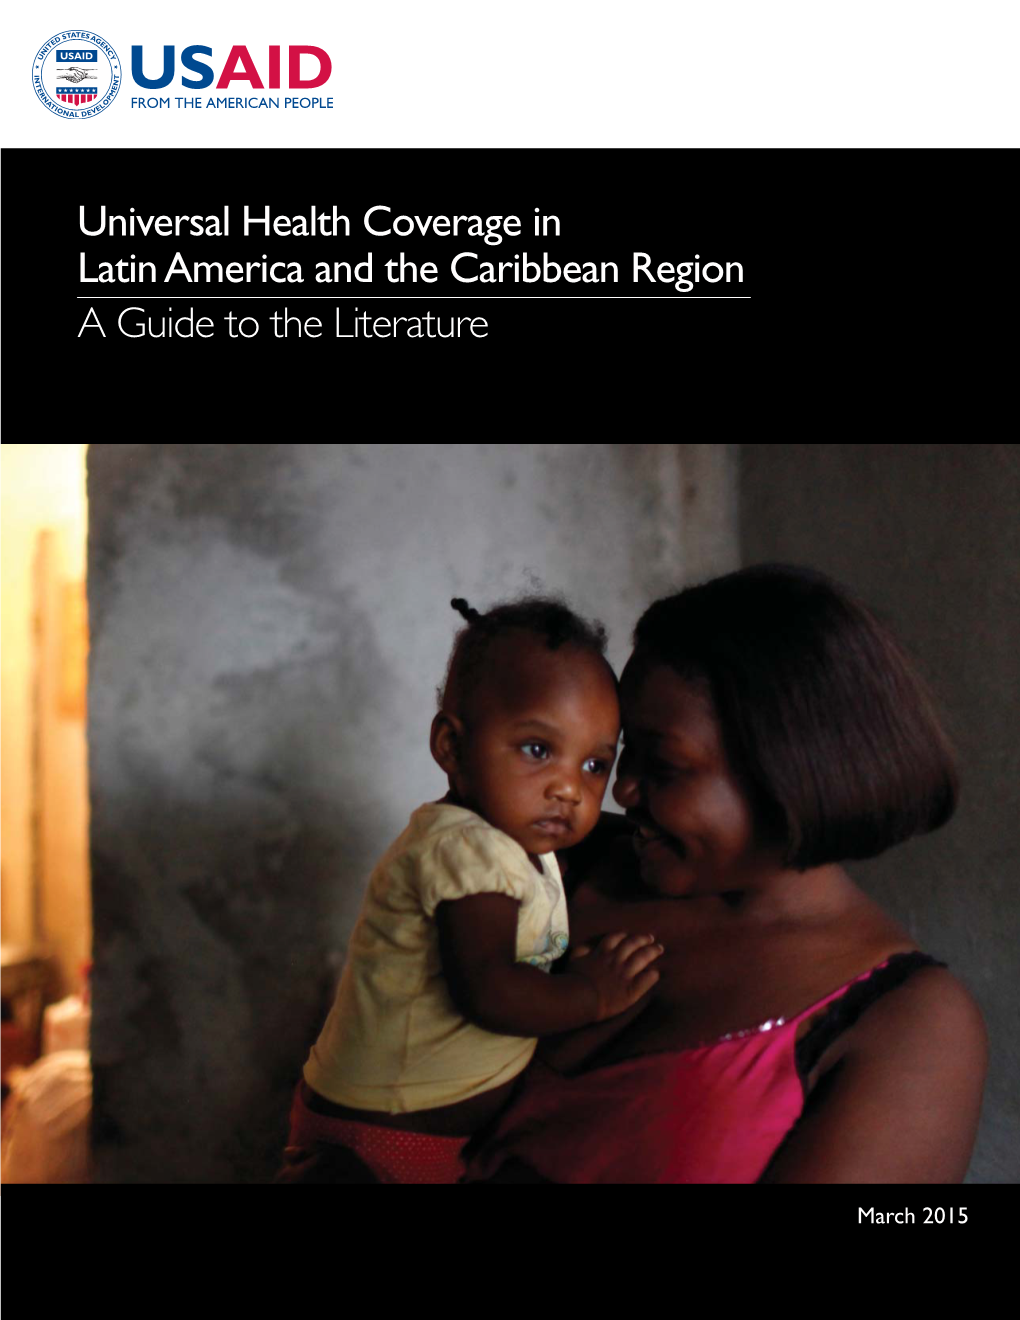 Universal Health Coverage in Latin America and the Caribbean Region a Guide to the Literature